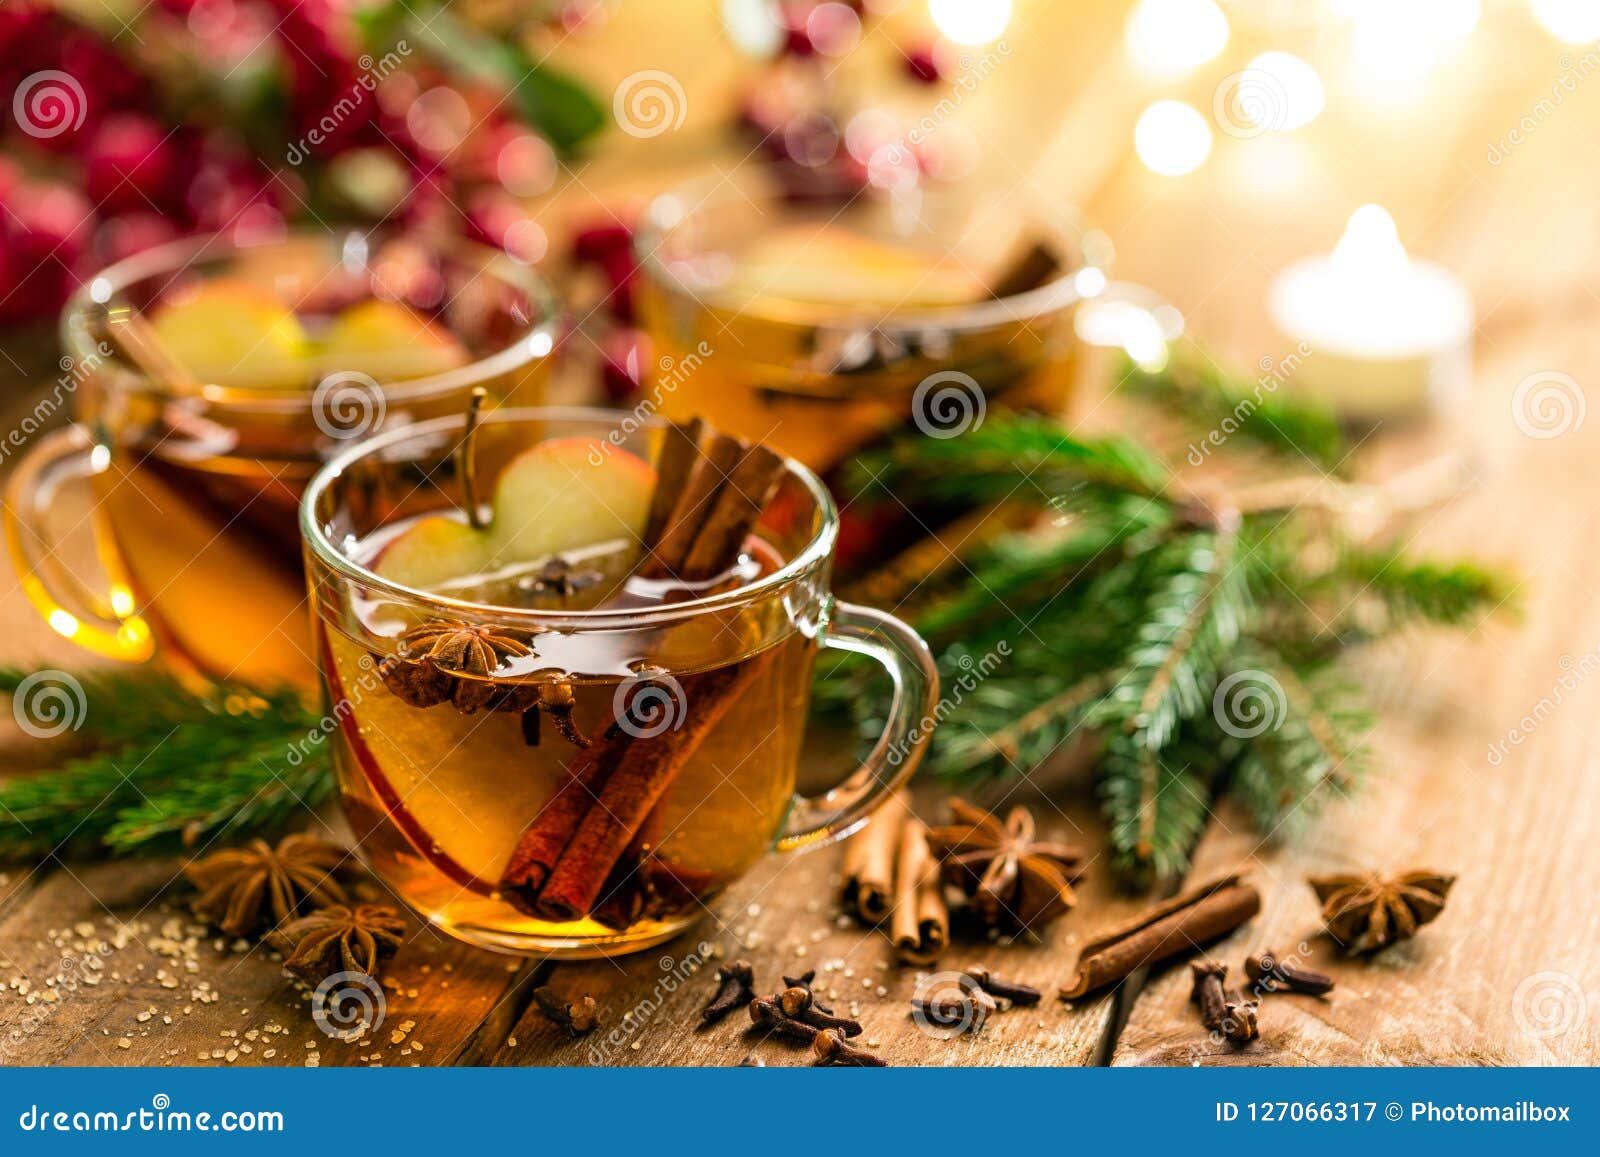 mulled cider with cinnamon, cloves and anise. traditional christmas drink